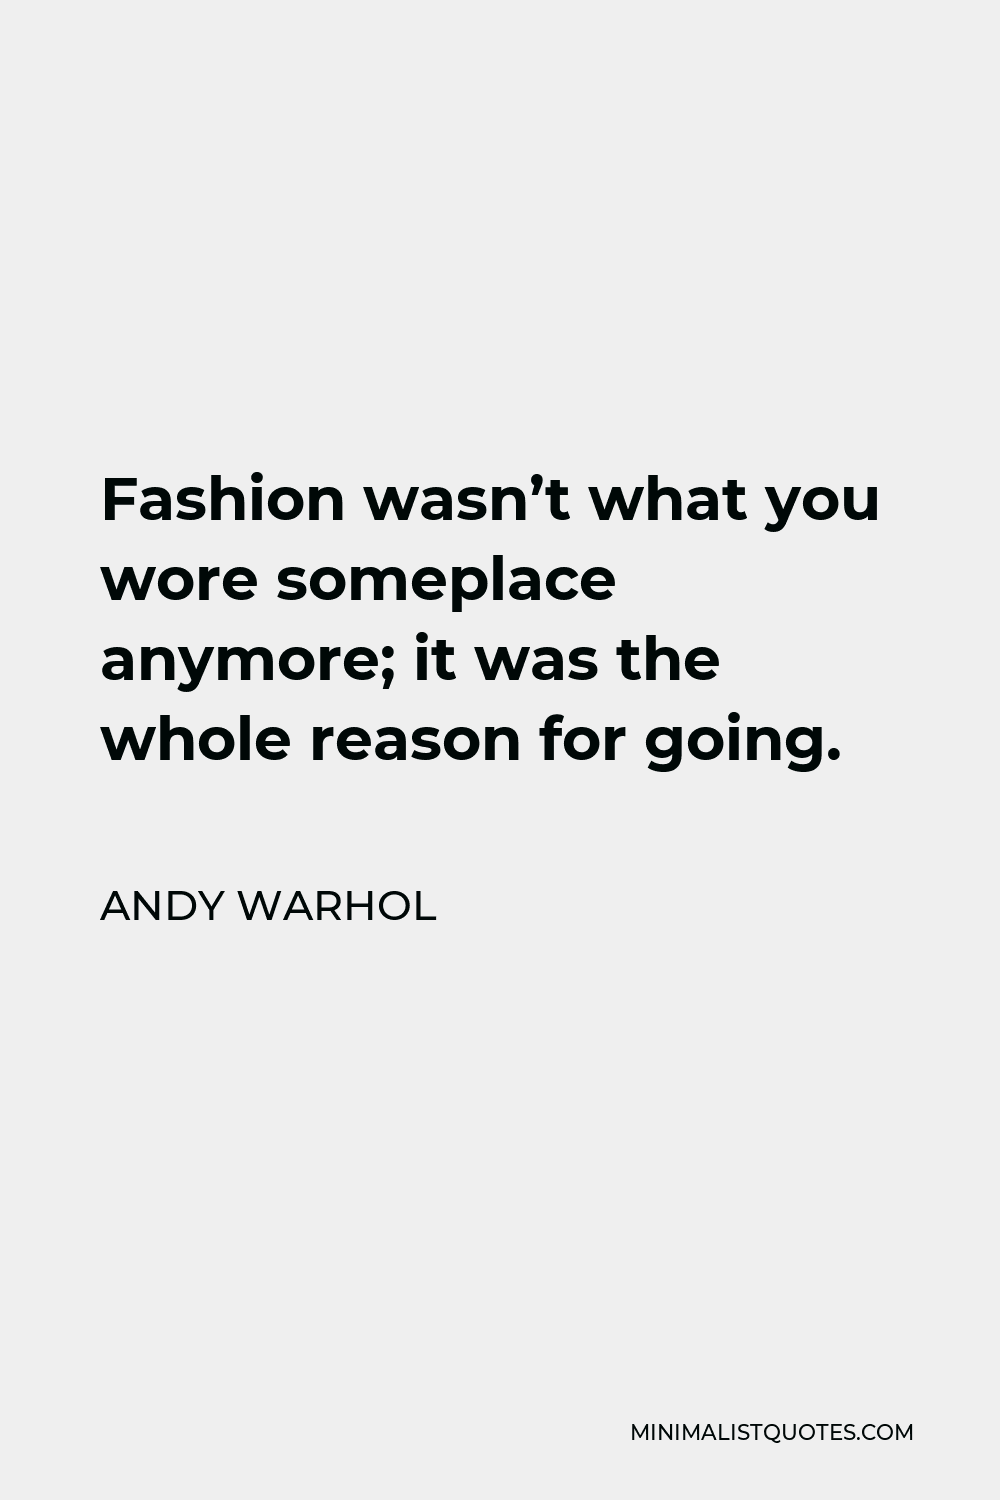 Andy Warhol Quote - Fashion wasn’t what you wore someplace anymore; it was the whole reason for going.